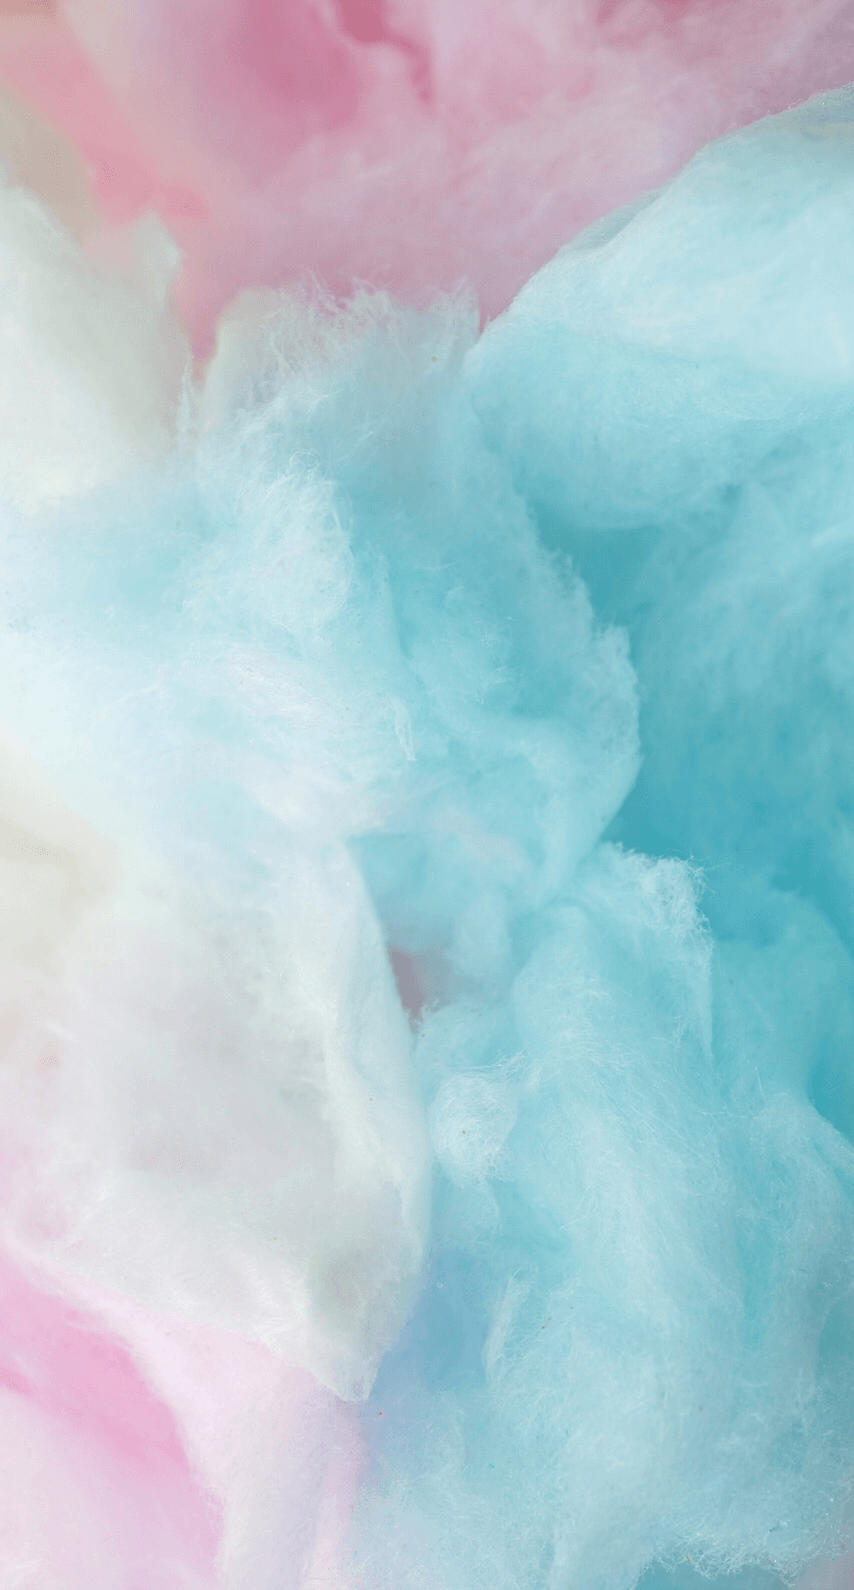 High Quality Pastel Vintage Iphone Wallpaper Hd